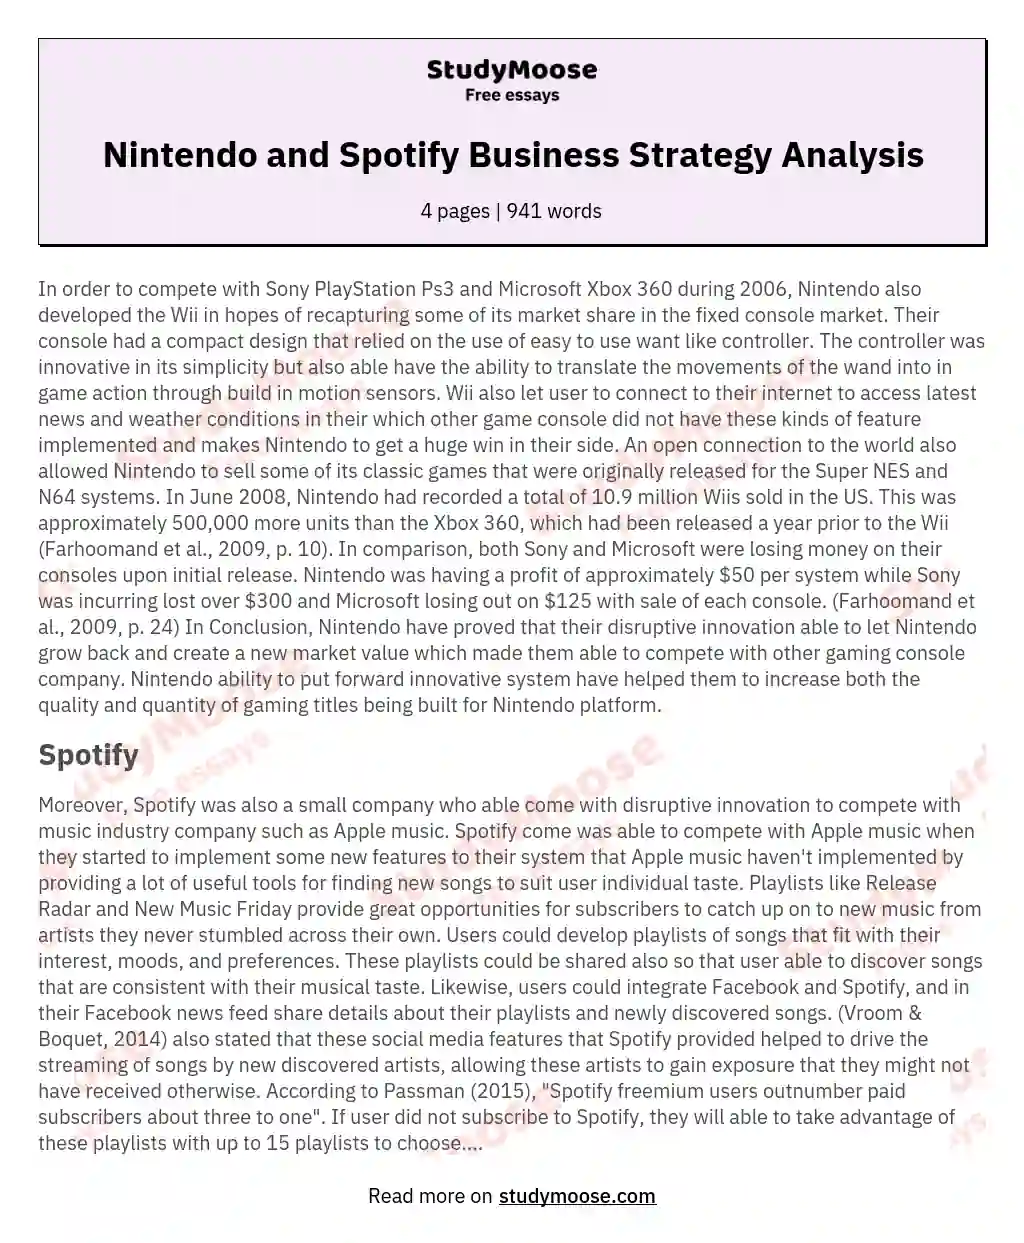 Nintendo and Spotify Business Strategy Analysis essay